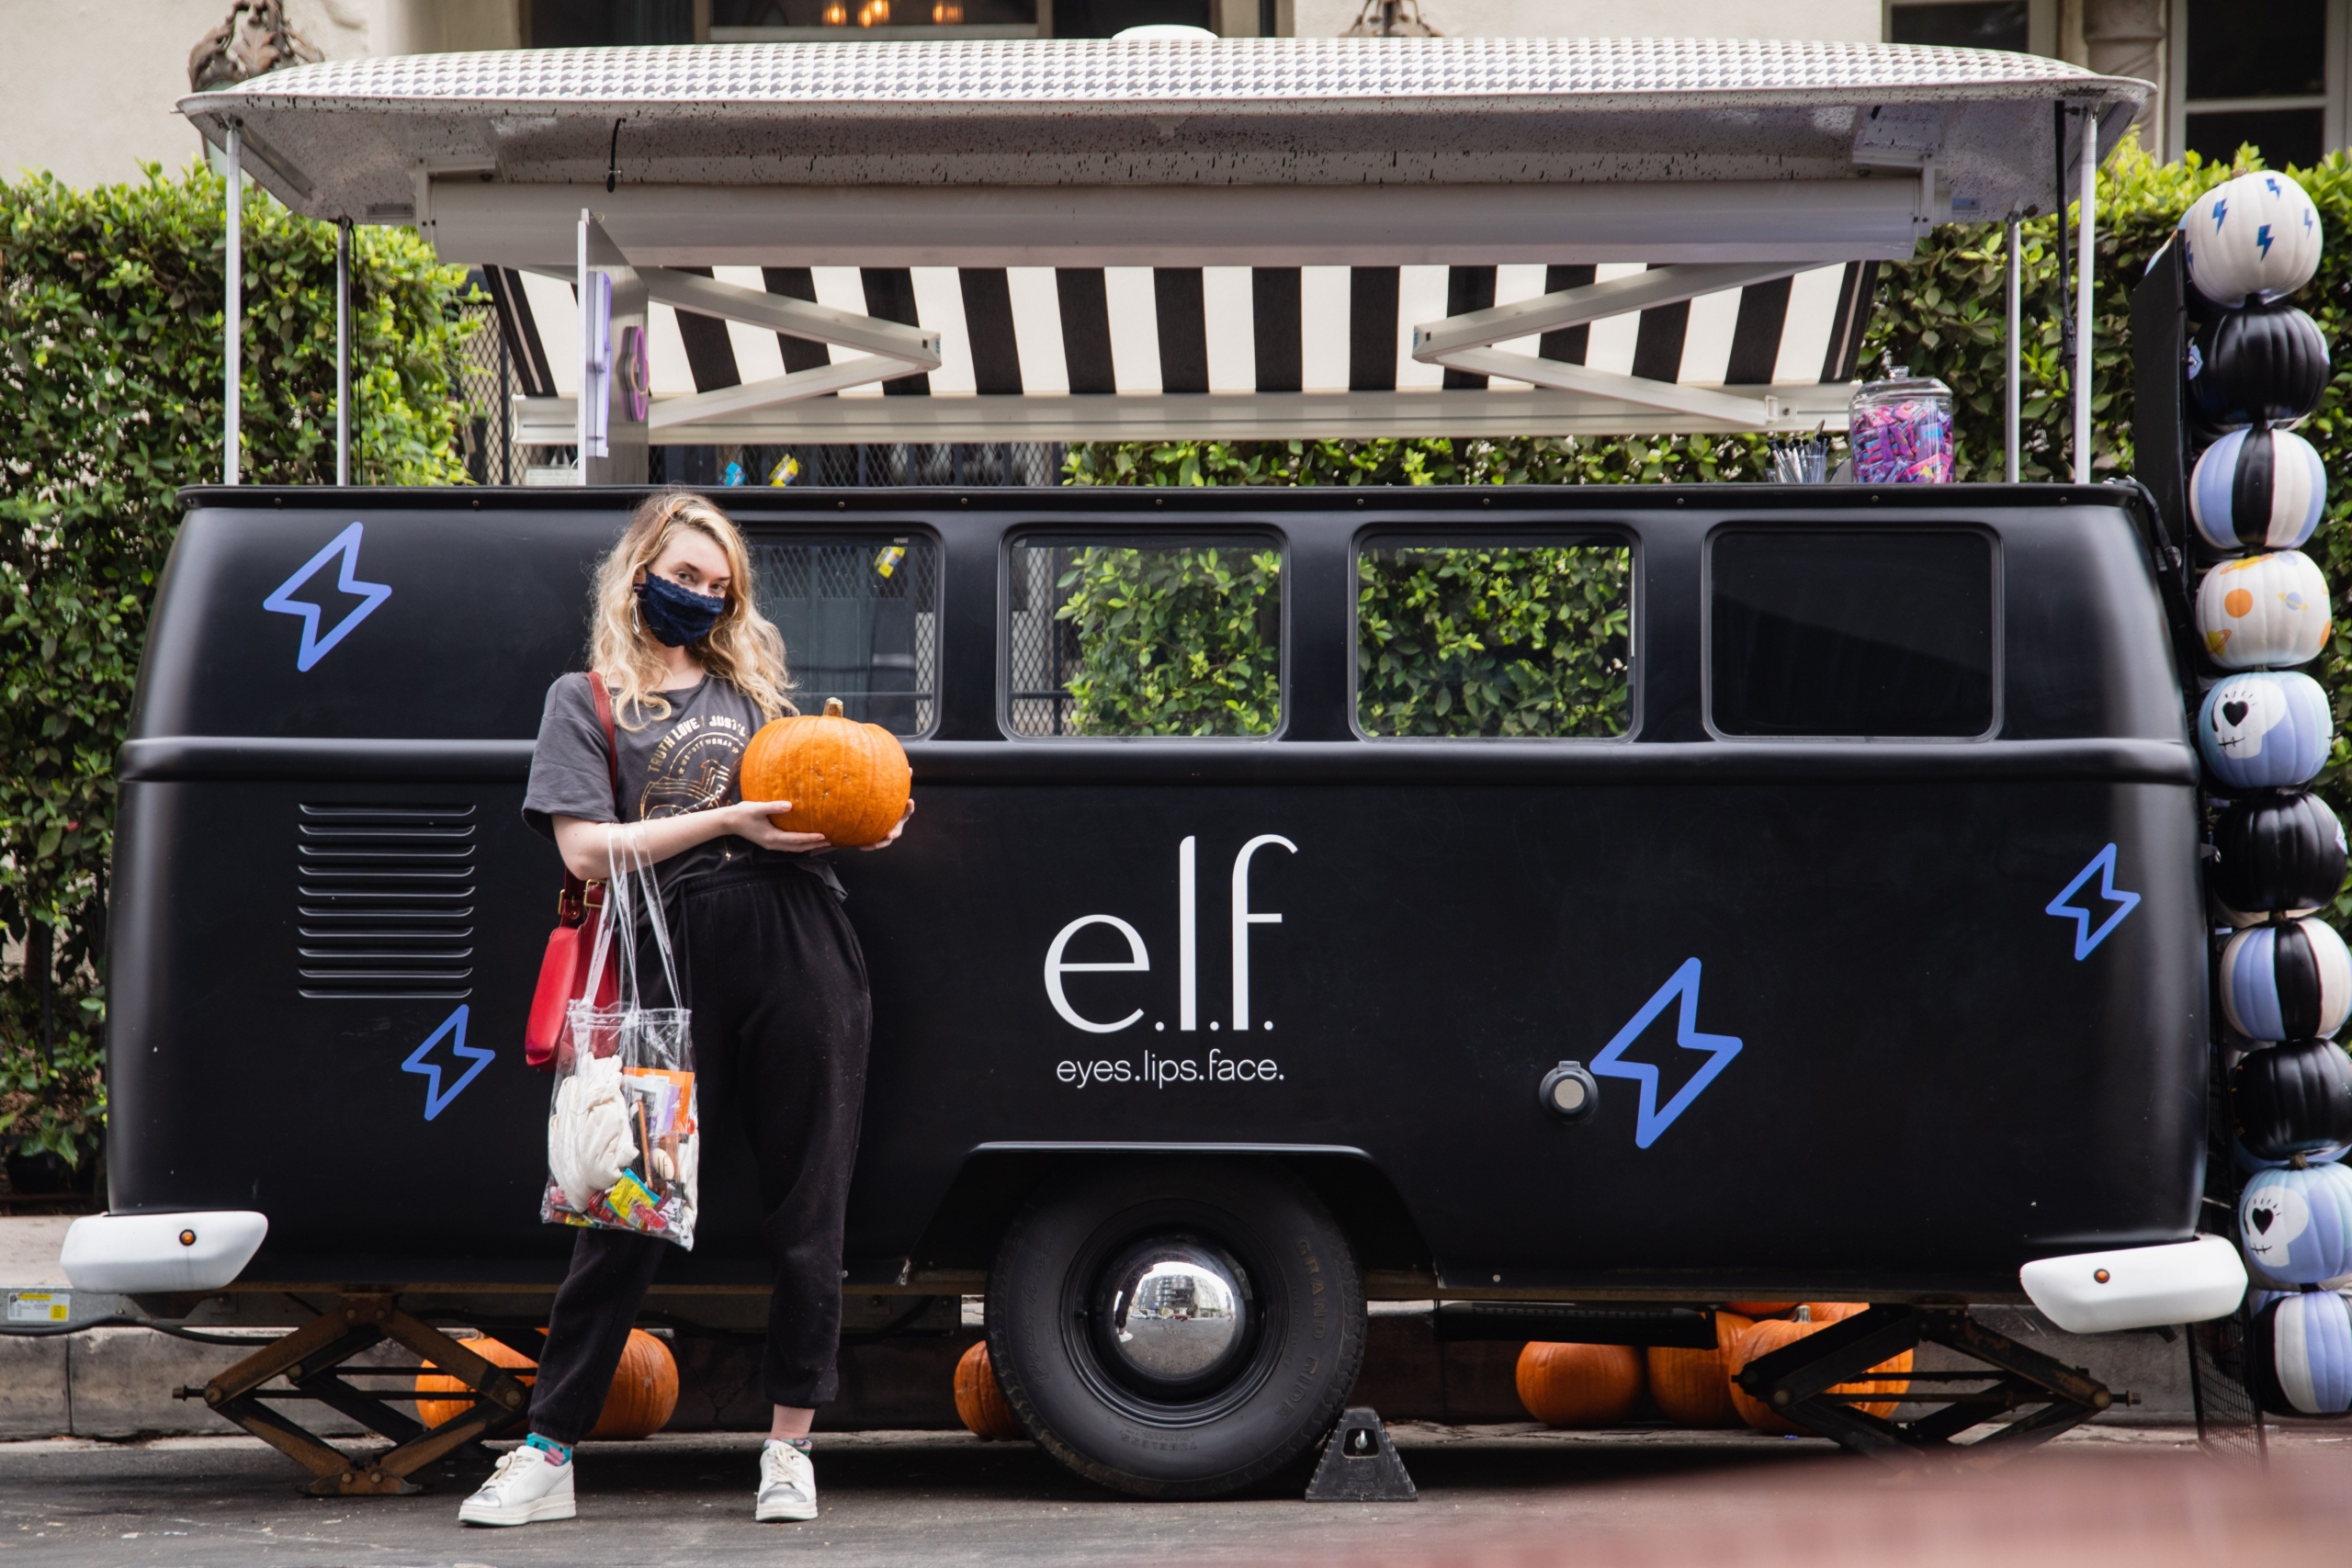 female presenting person wearing dark colors and mask, holding orange pumpkin and clear bag, standing in front of black pop-up vehicle painted with e.l.f. logo.